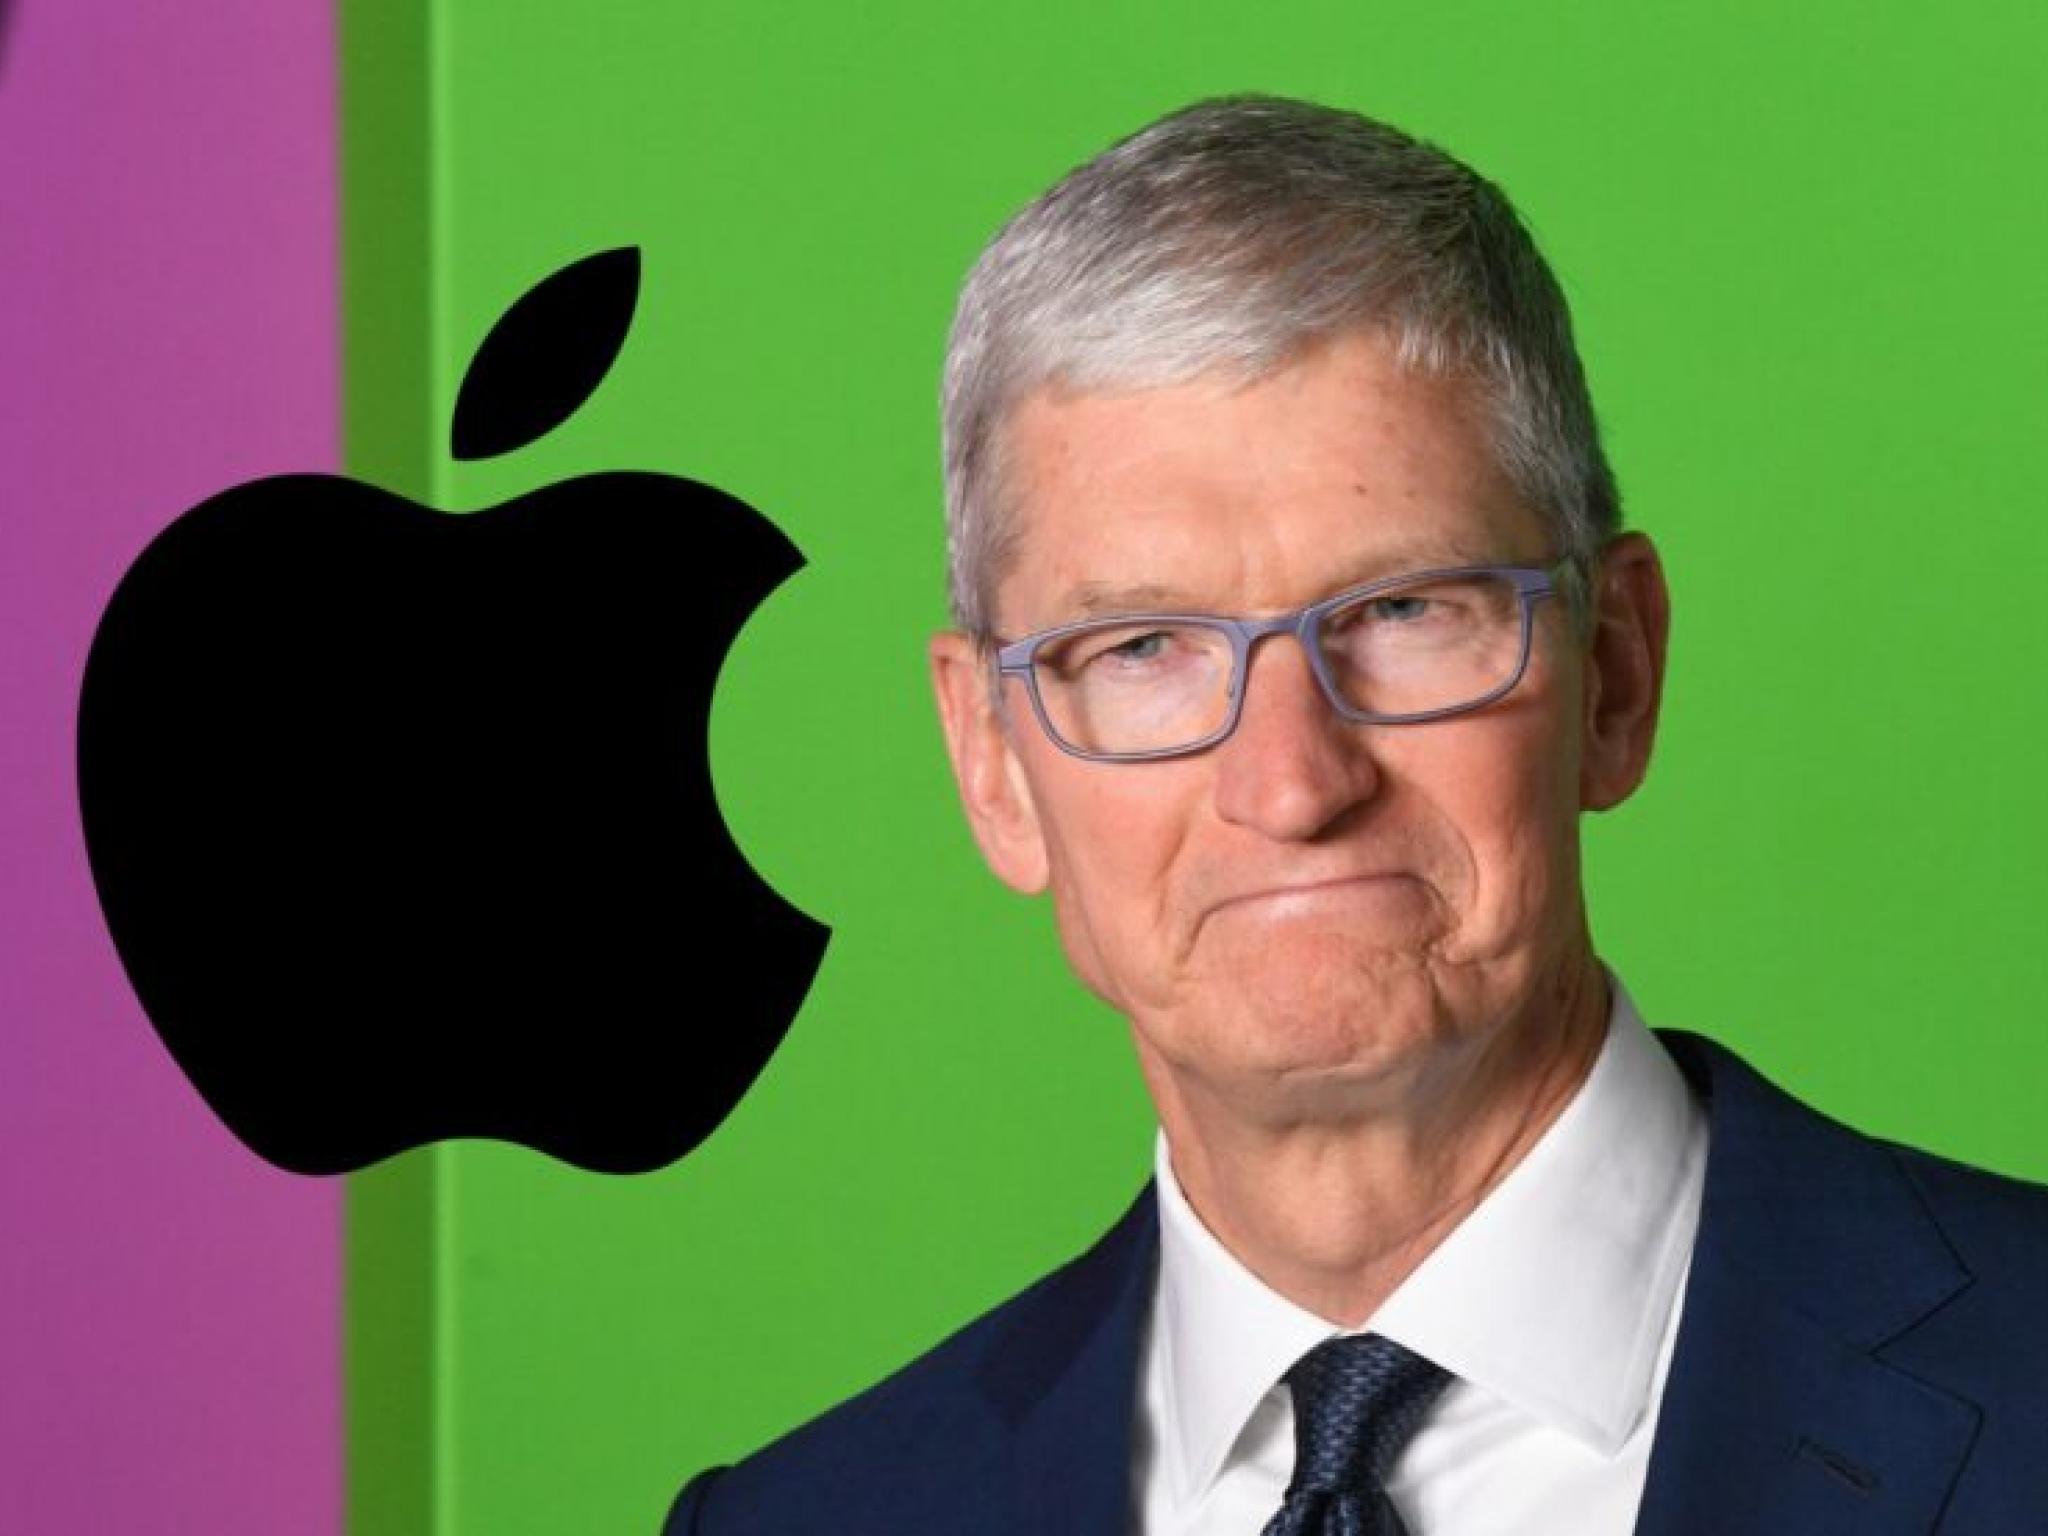  tim-cook-blasts-dojs-antitrust-lawsuit-against-apple-says-hes-going-to-make-sure-it-doesnt-become-a-distraction-were-going-to-fight-it 